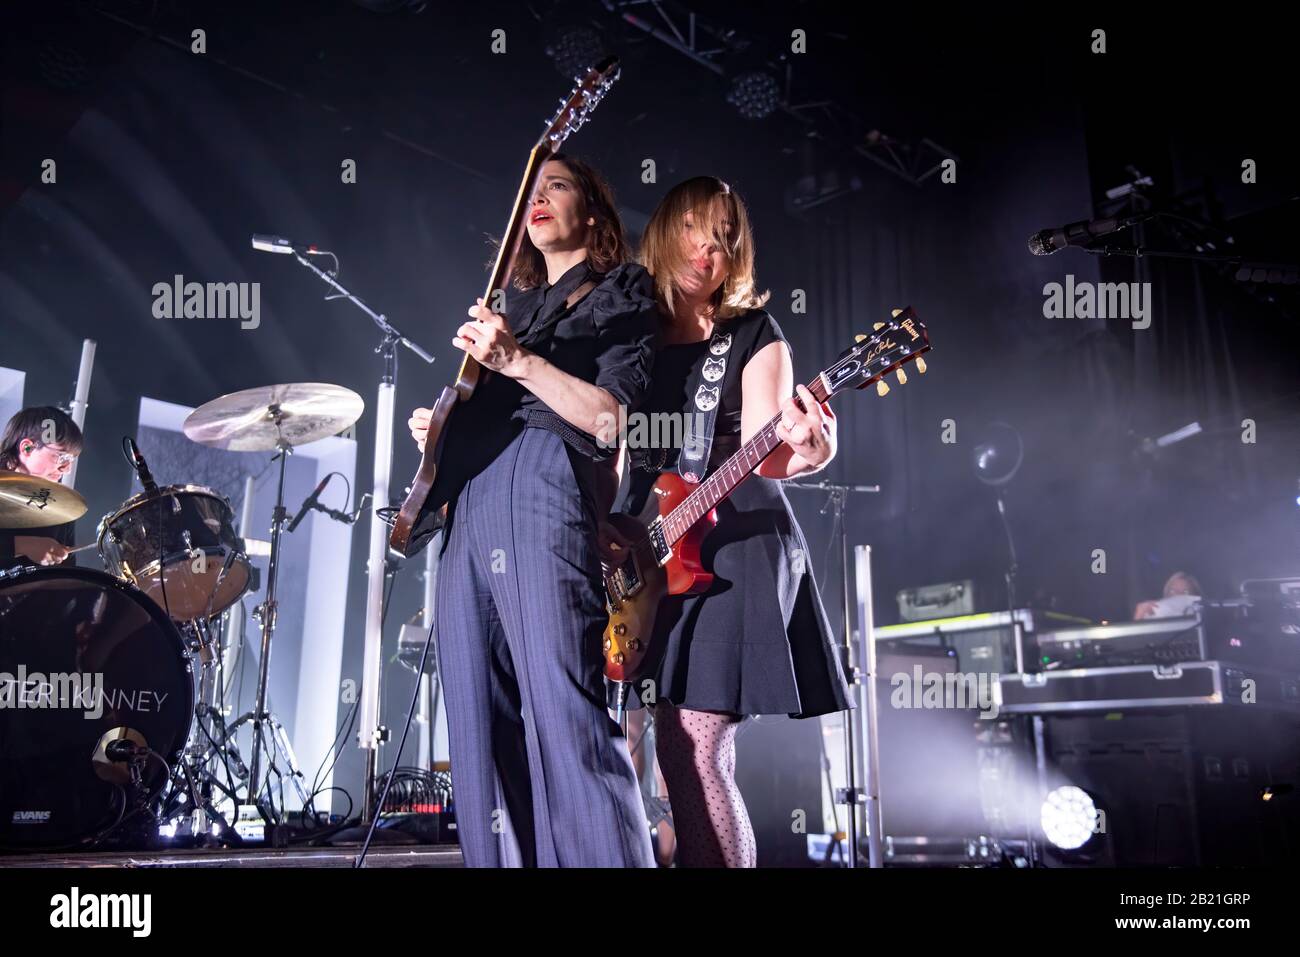 Manchester, UK. 27th February 2020. Carrie Rachel Brownstein and Corin Lisa Tucker of the band Sleater Kinney perform at the Manchester  Academy  on their  “The Center Won’t Hold” UK tour, Manchester 2020-02-27 . Credit:  Gary Mather/Alamy Live News Stock Photo